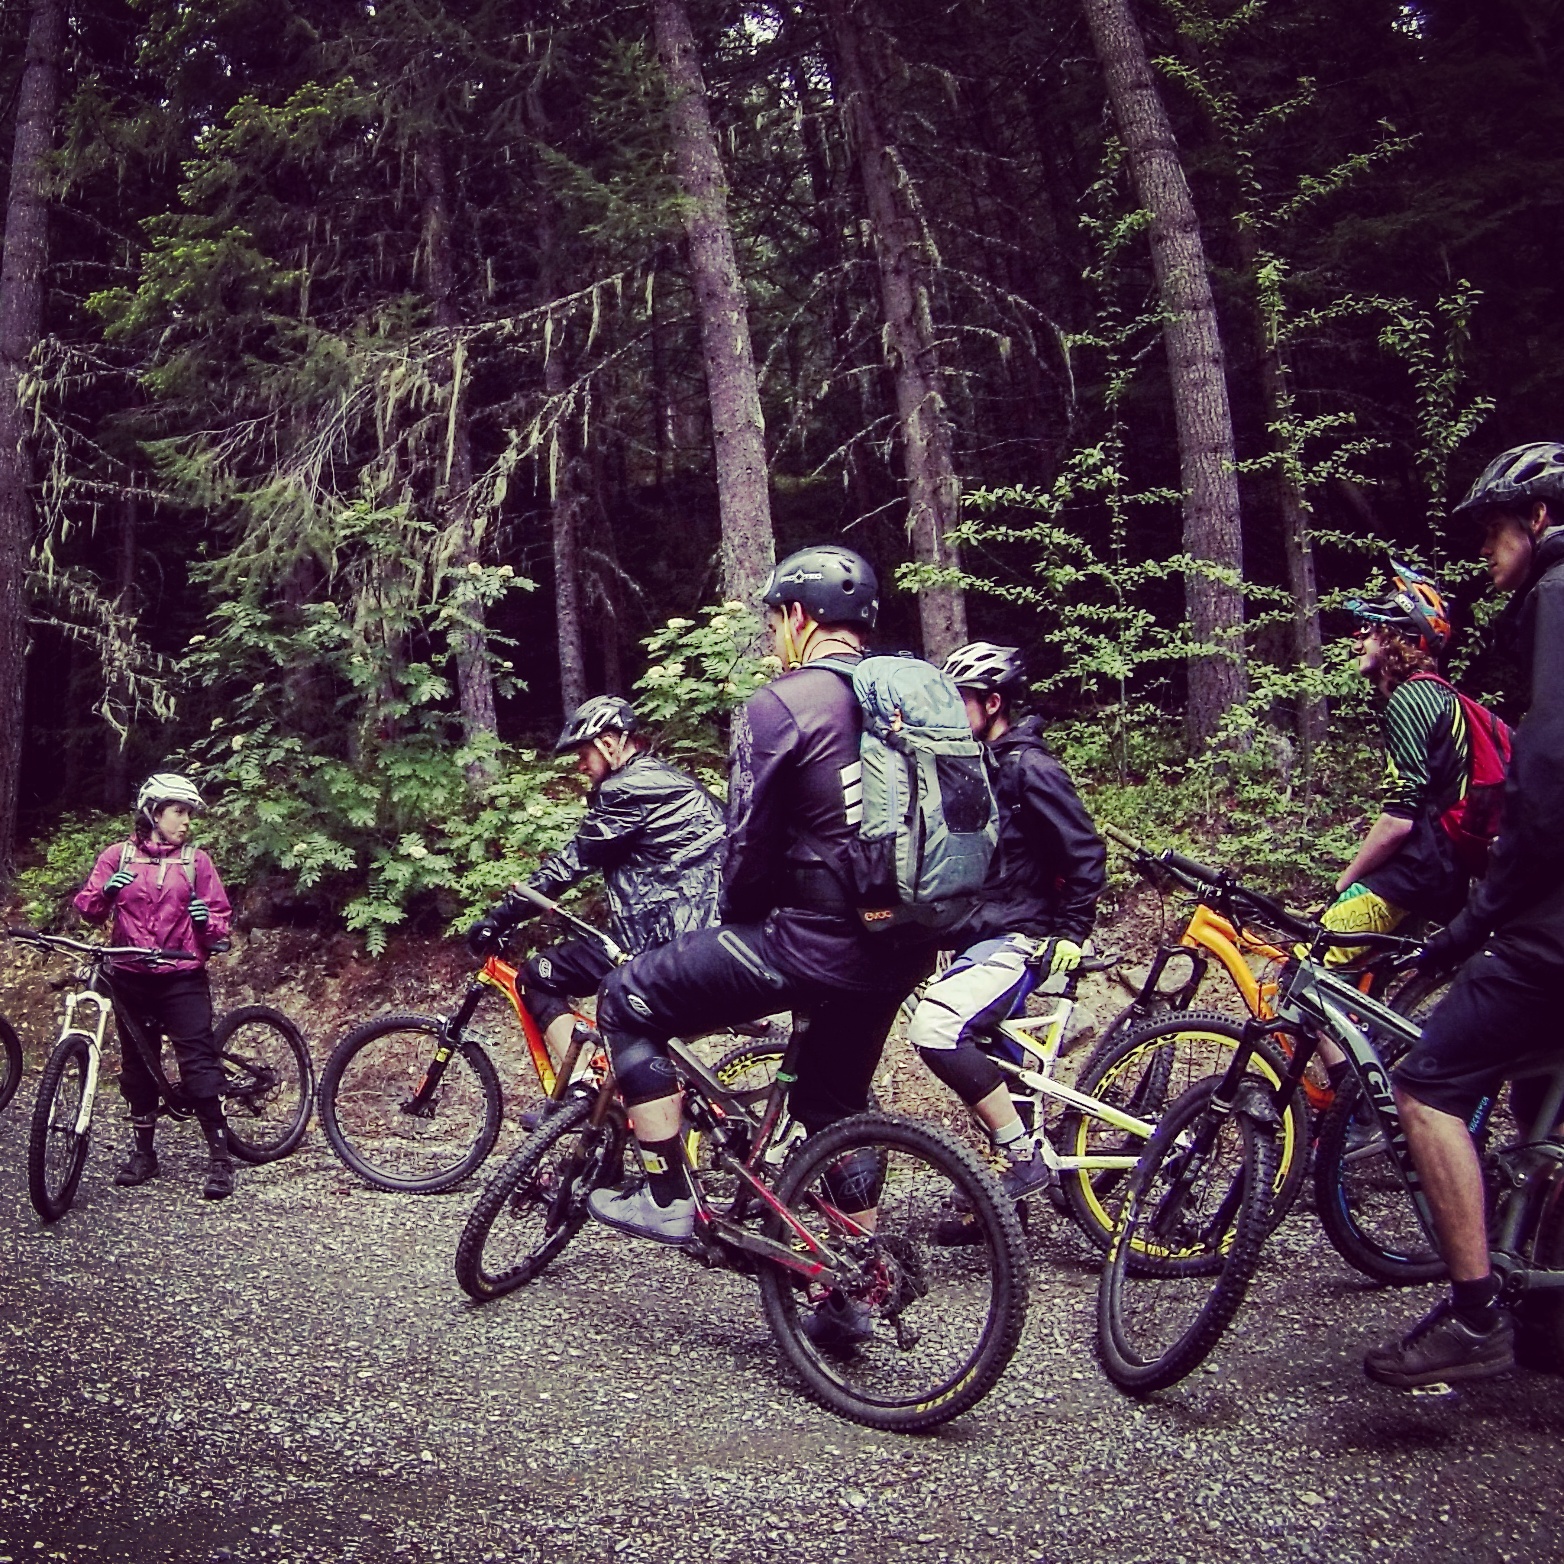 Bike Park Academy Trainees blast an afternoon on the Zappa trails